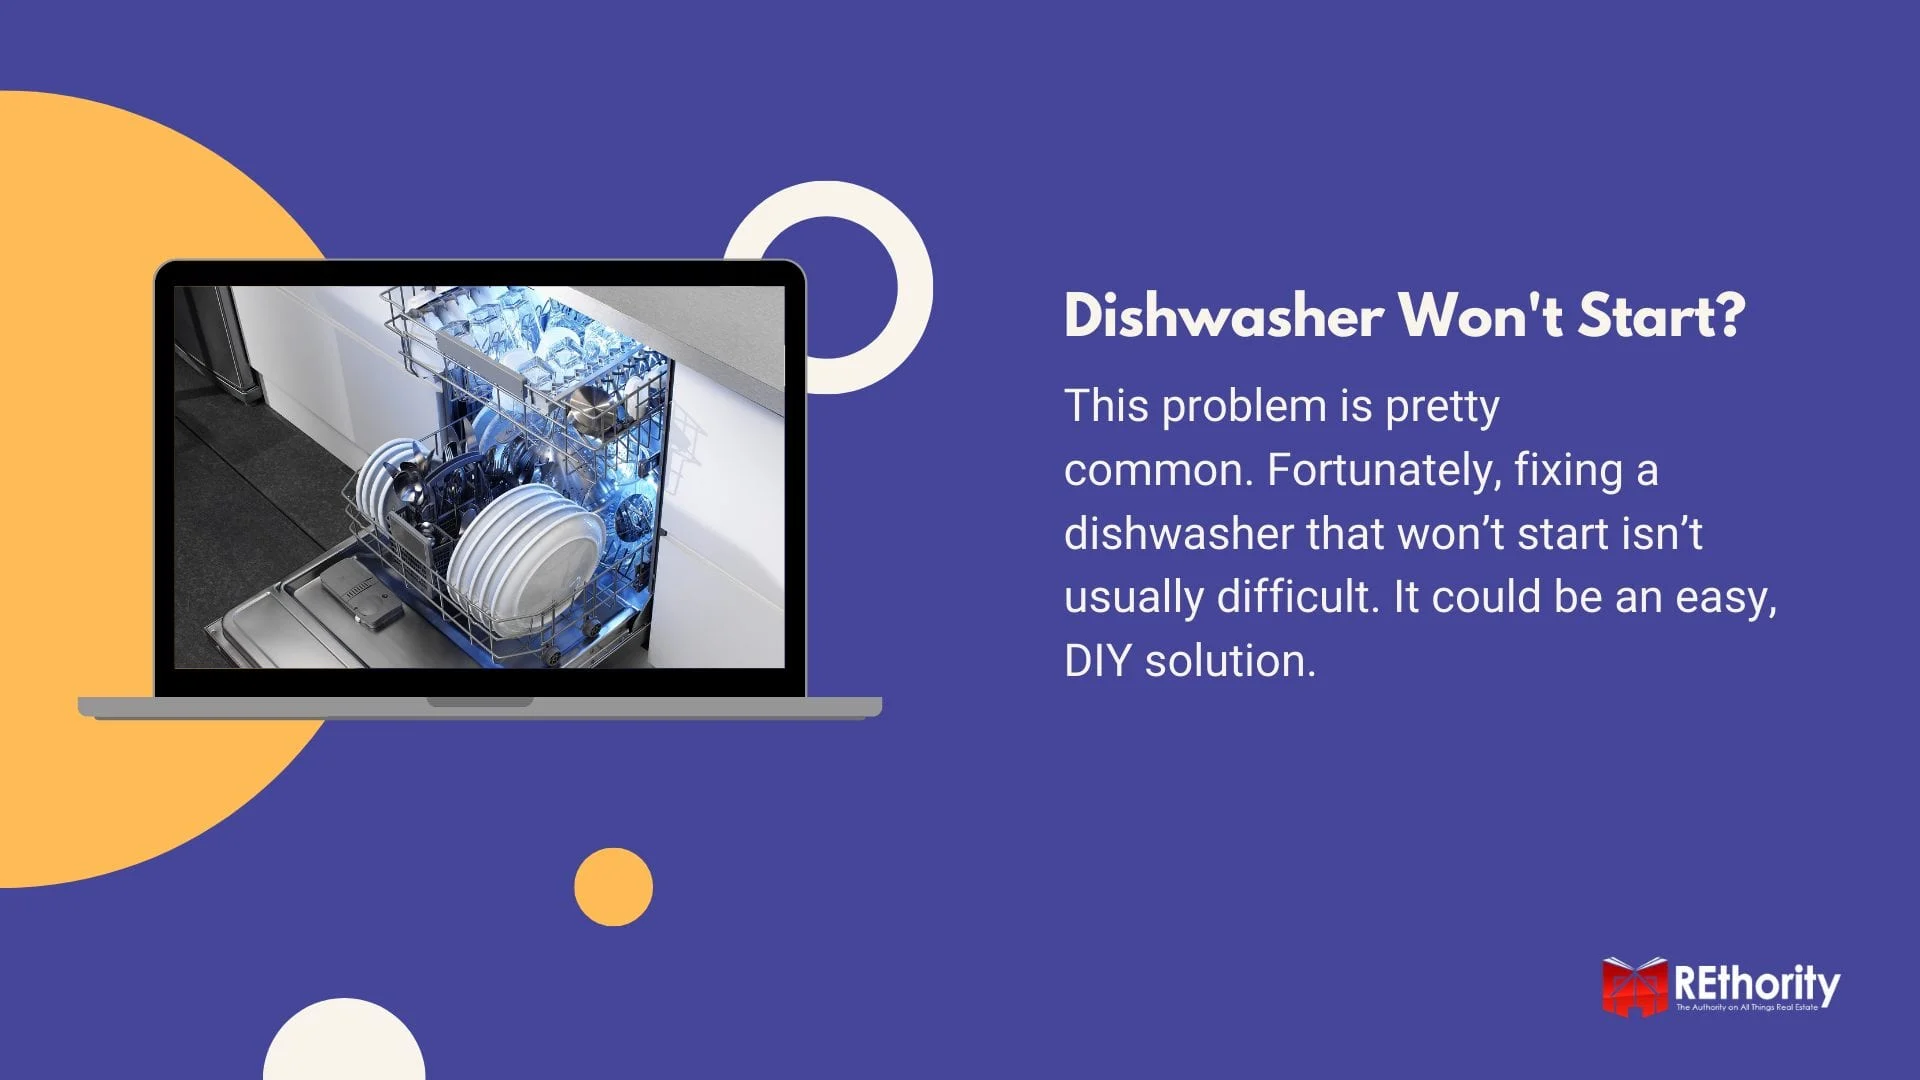 Dishwasher wont start graphic featuring a dishwasher on a screen and a brief blurb about what this article is about